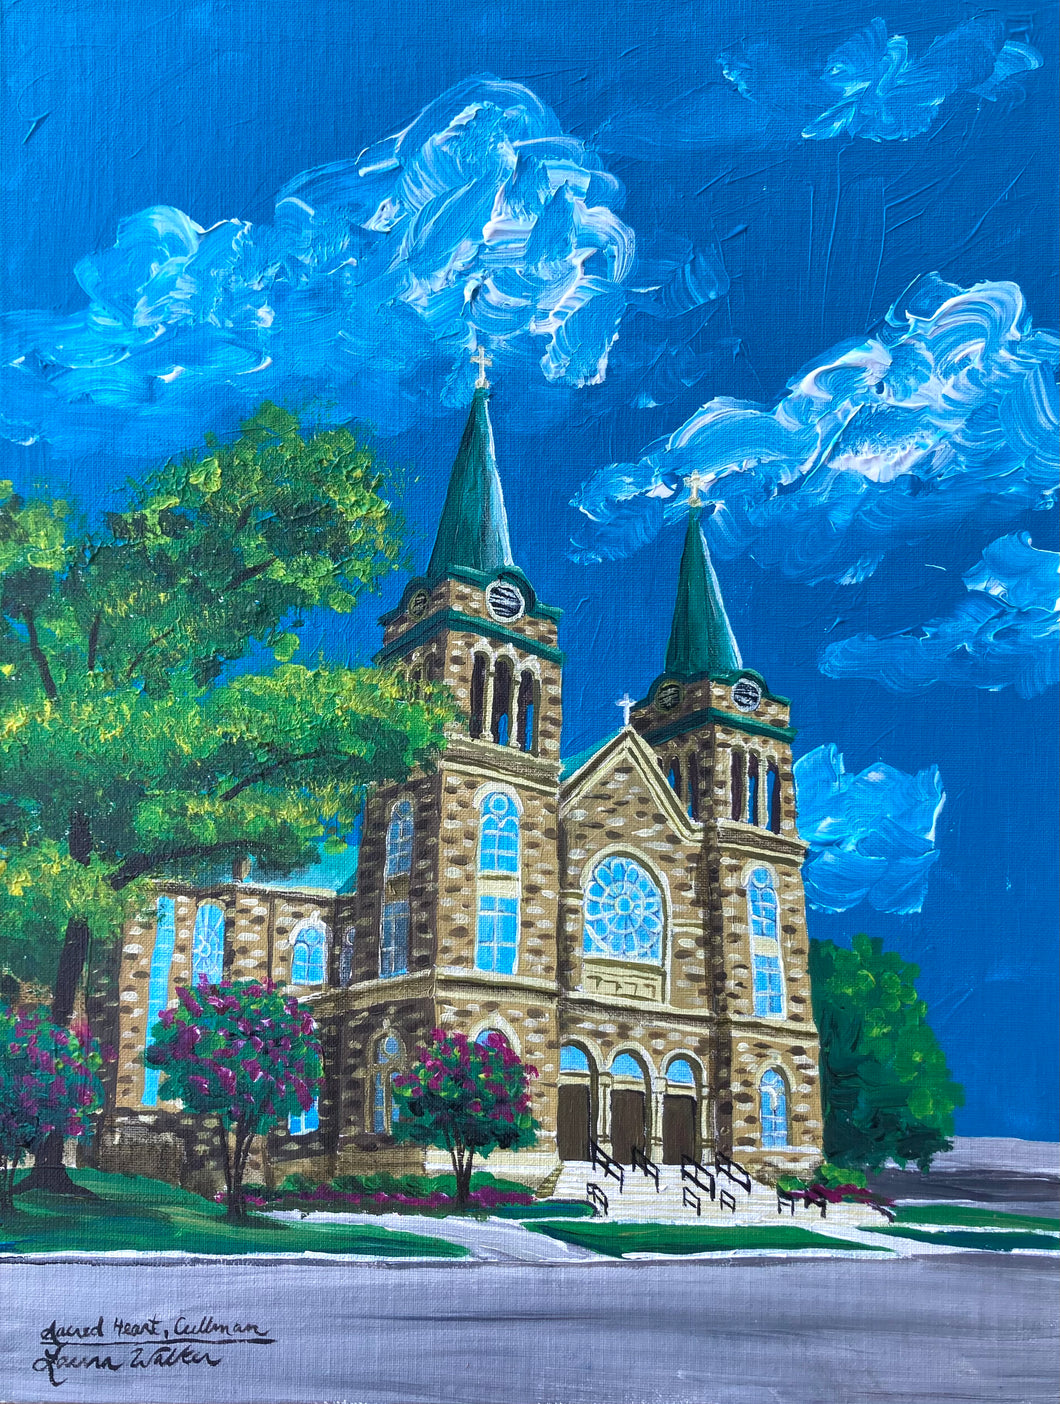 9x12, church, business, wedding venue, university building Made to order, acrylic painting